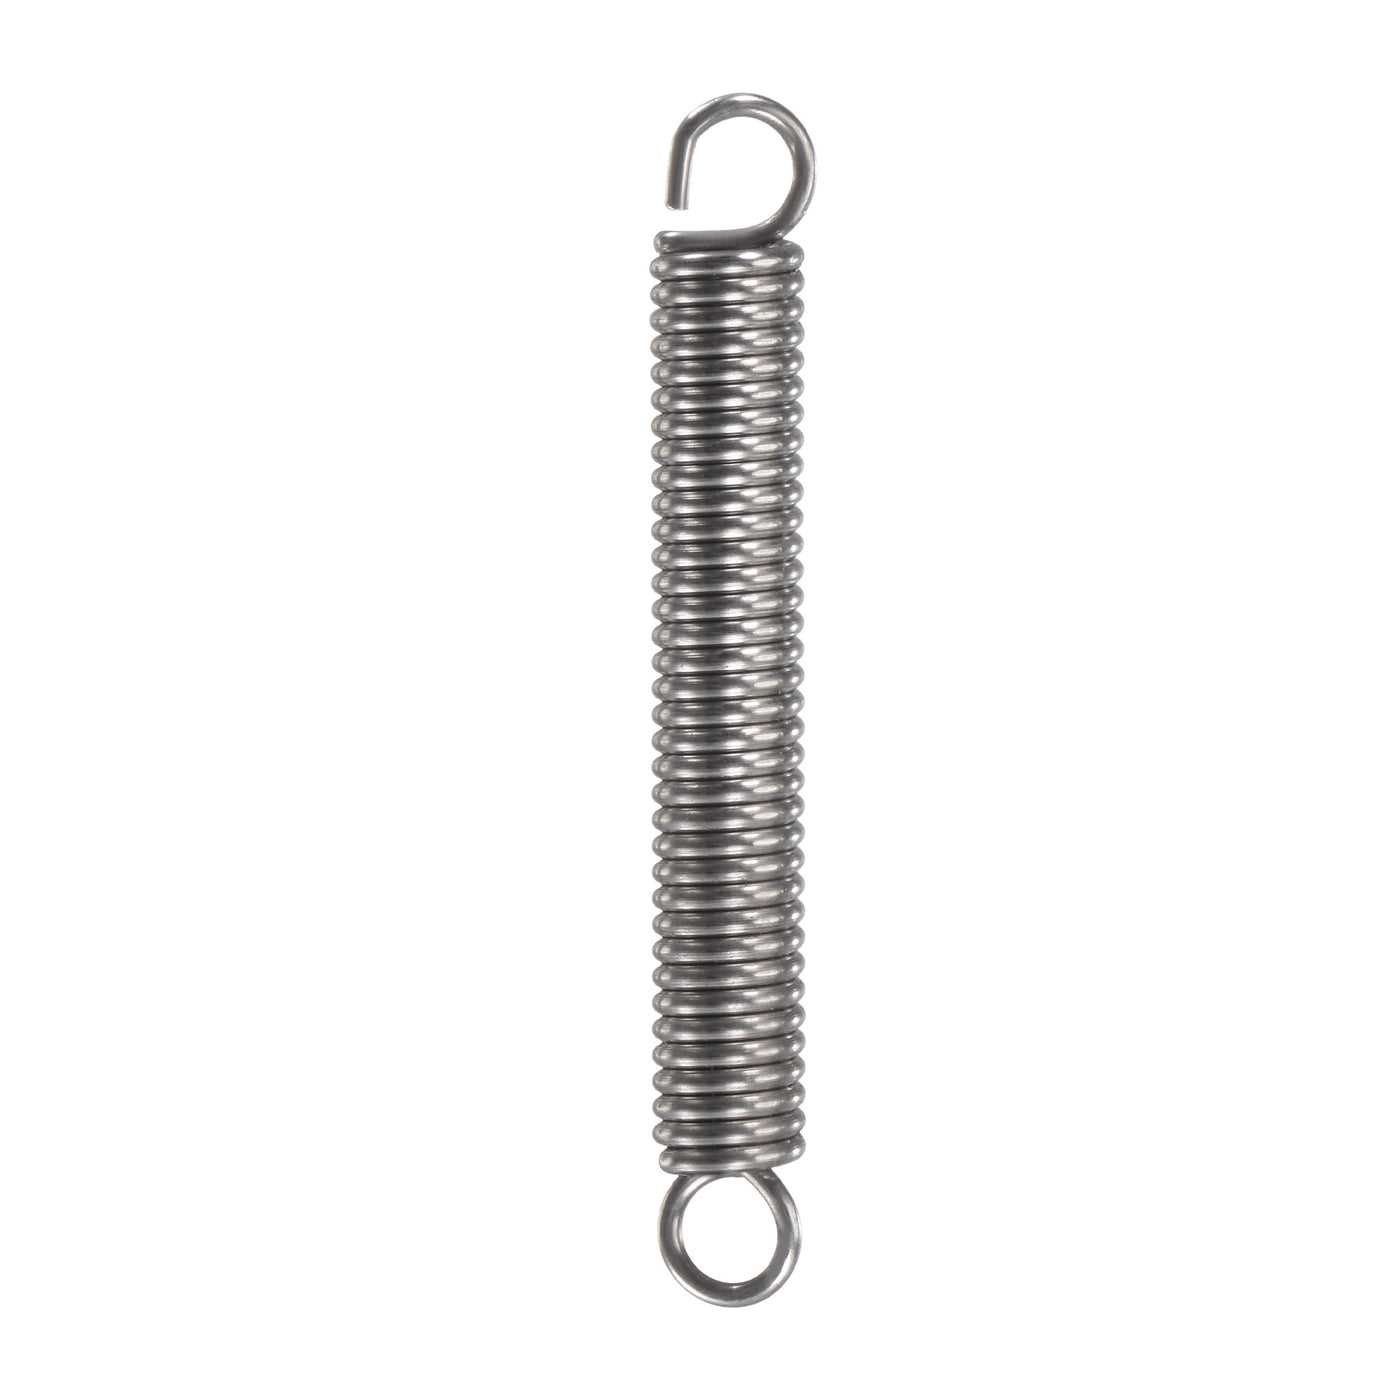 Uxcell Uxcell 1mmx6mmx50mm Extended Compression Spring,5.3Lbs Load Capacity,Silver,5pcs